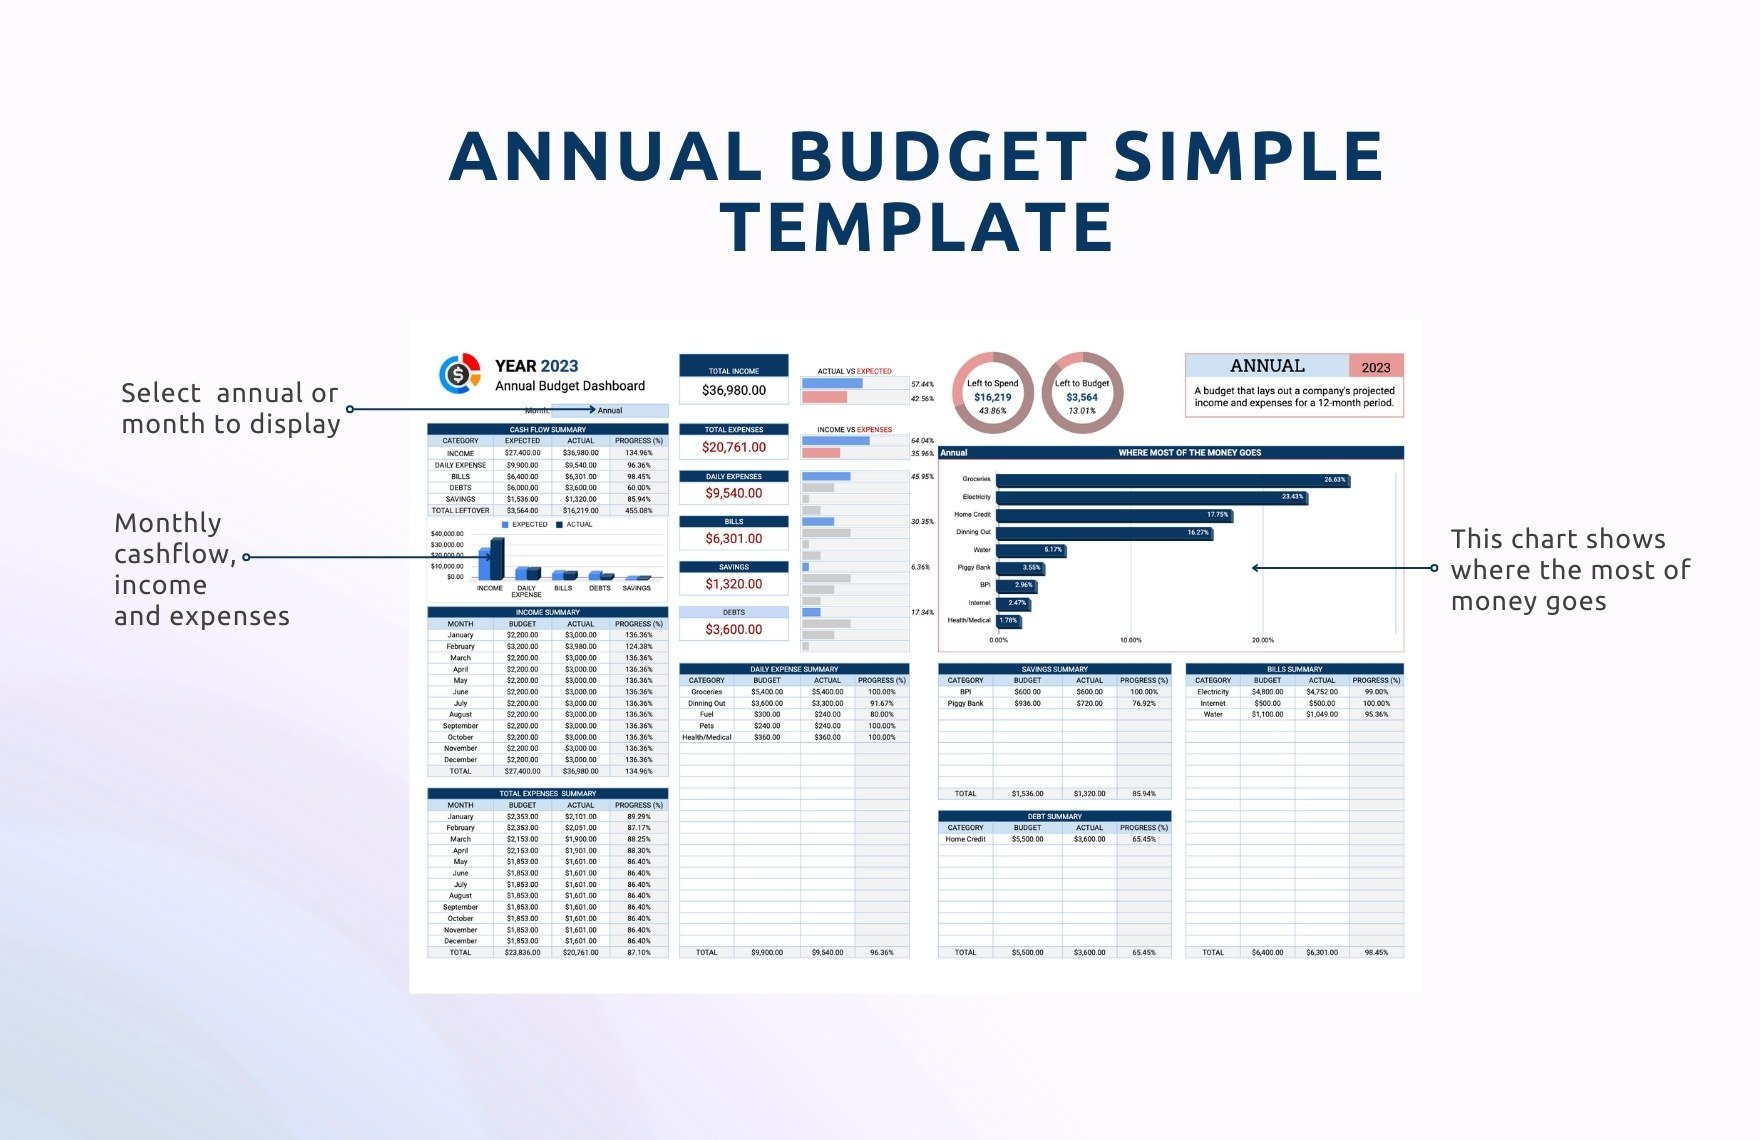 Annual Budget Simple Template